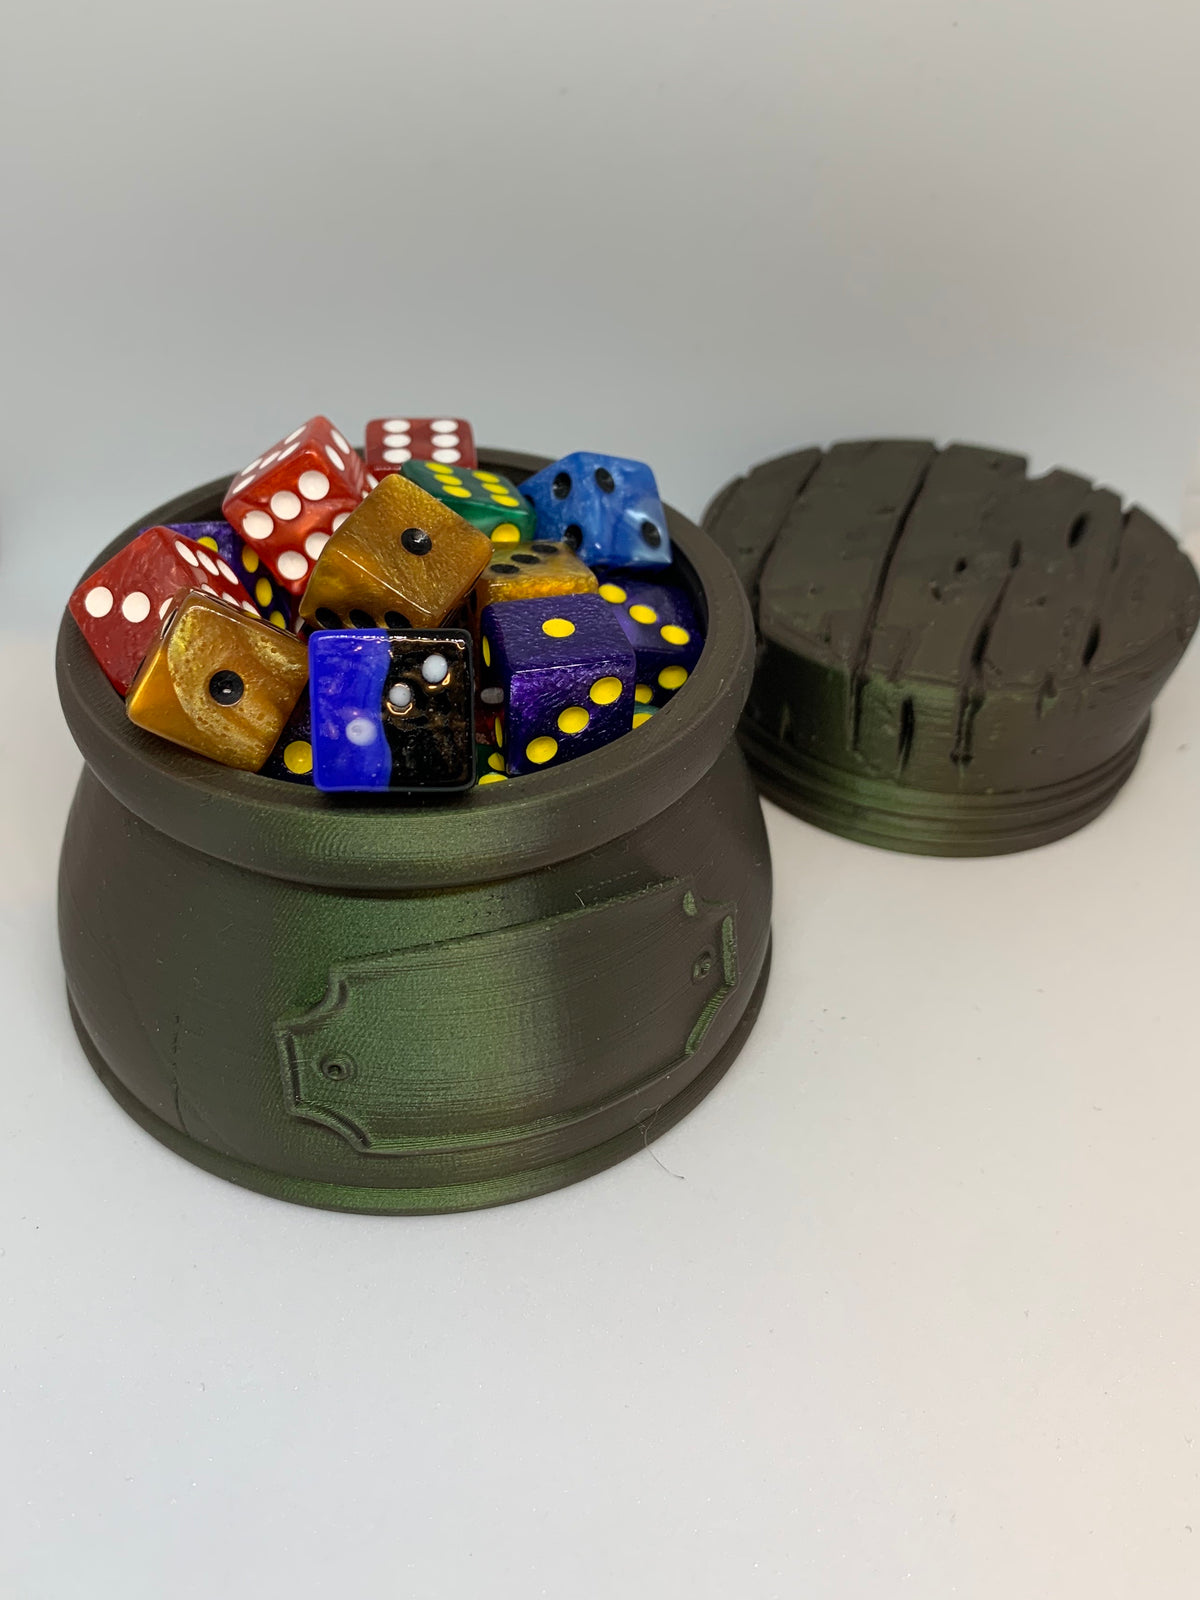 Wizard Themed Dice Box Storage Container